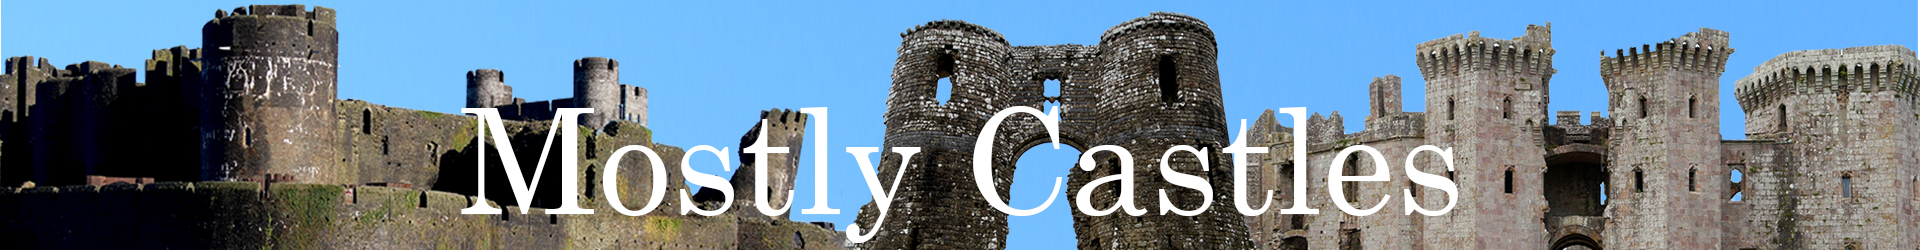 Raglan Castle – Fortress or Palace?